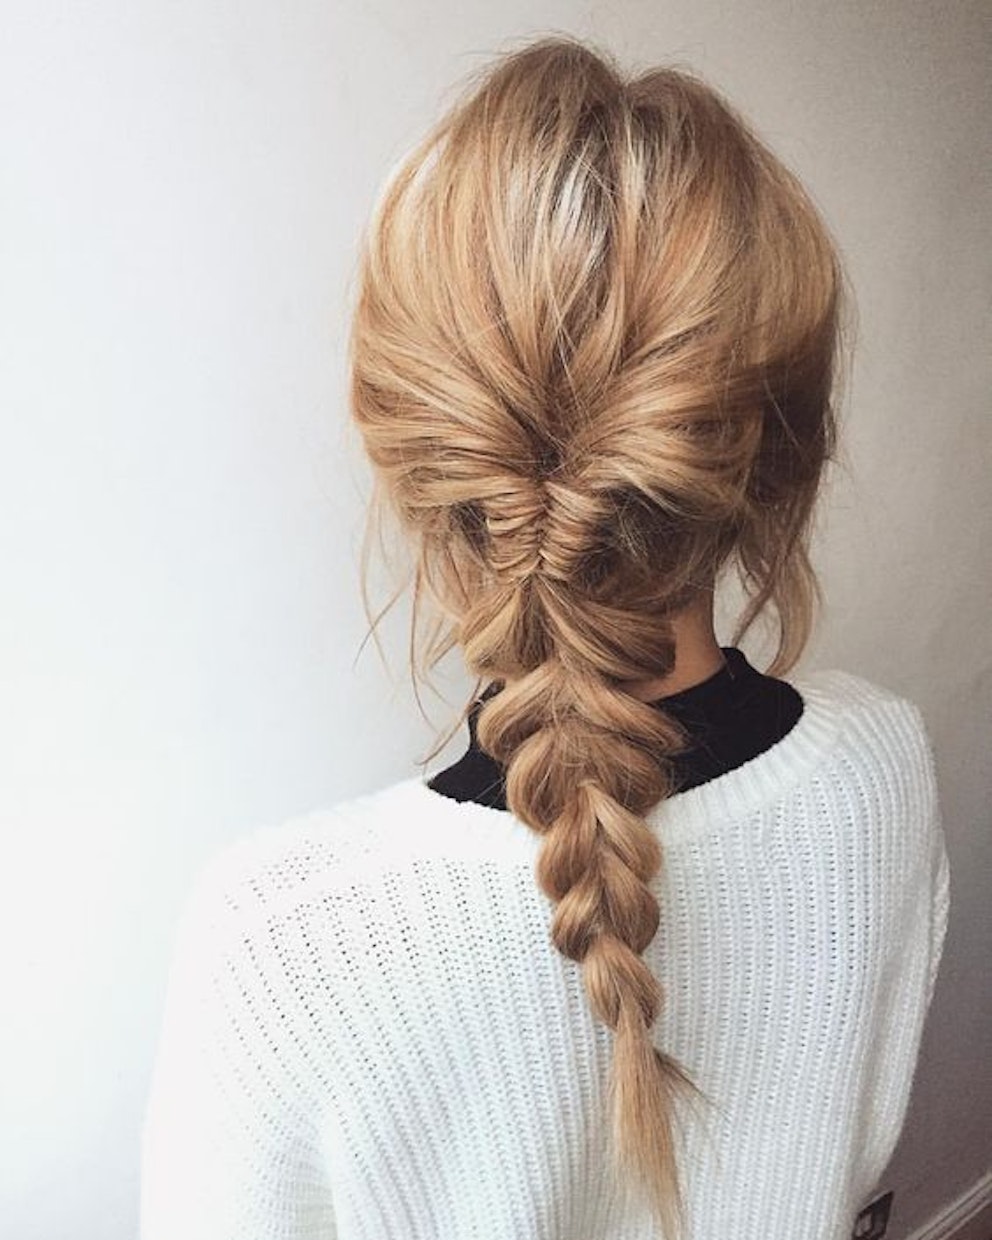 Fishtail Braid Hairstyle: How To, Step-By-Step and Pinterest ...